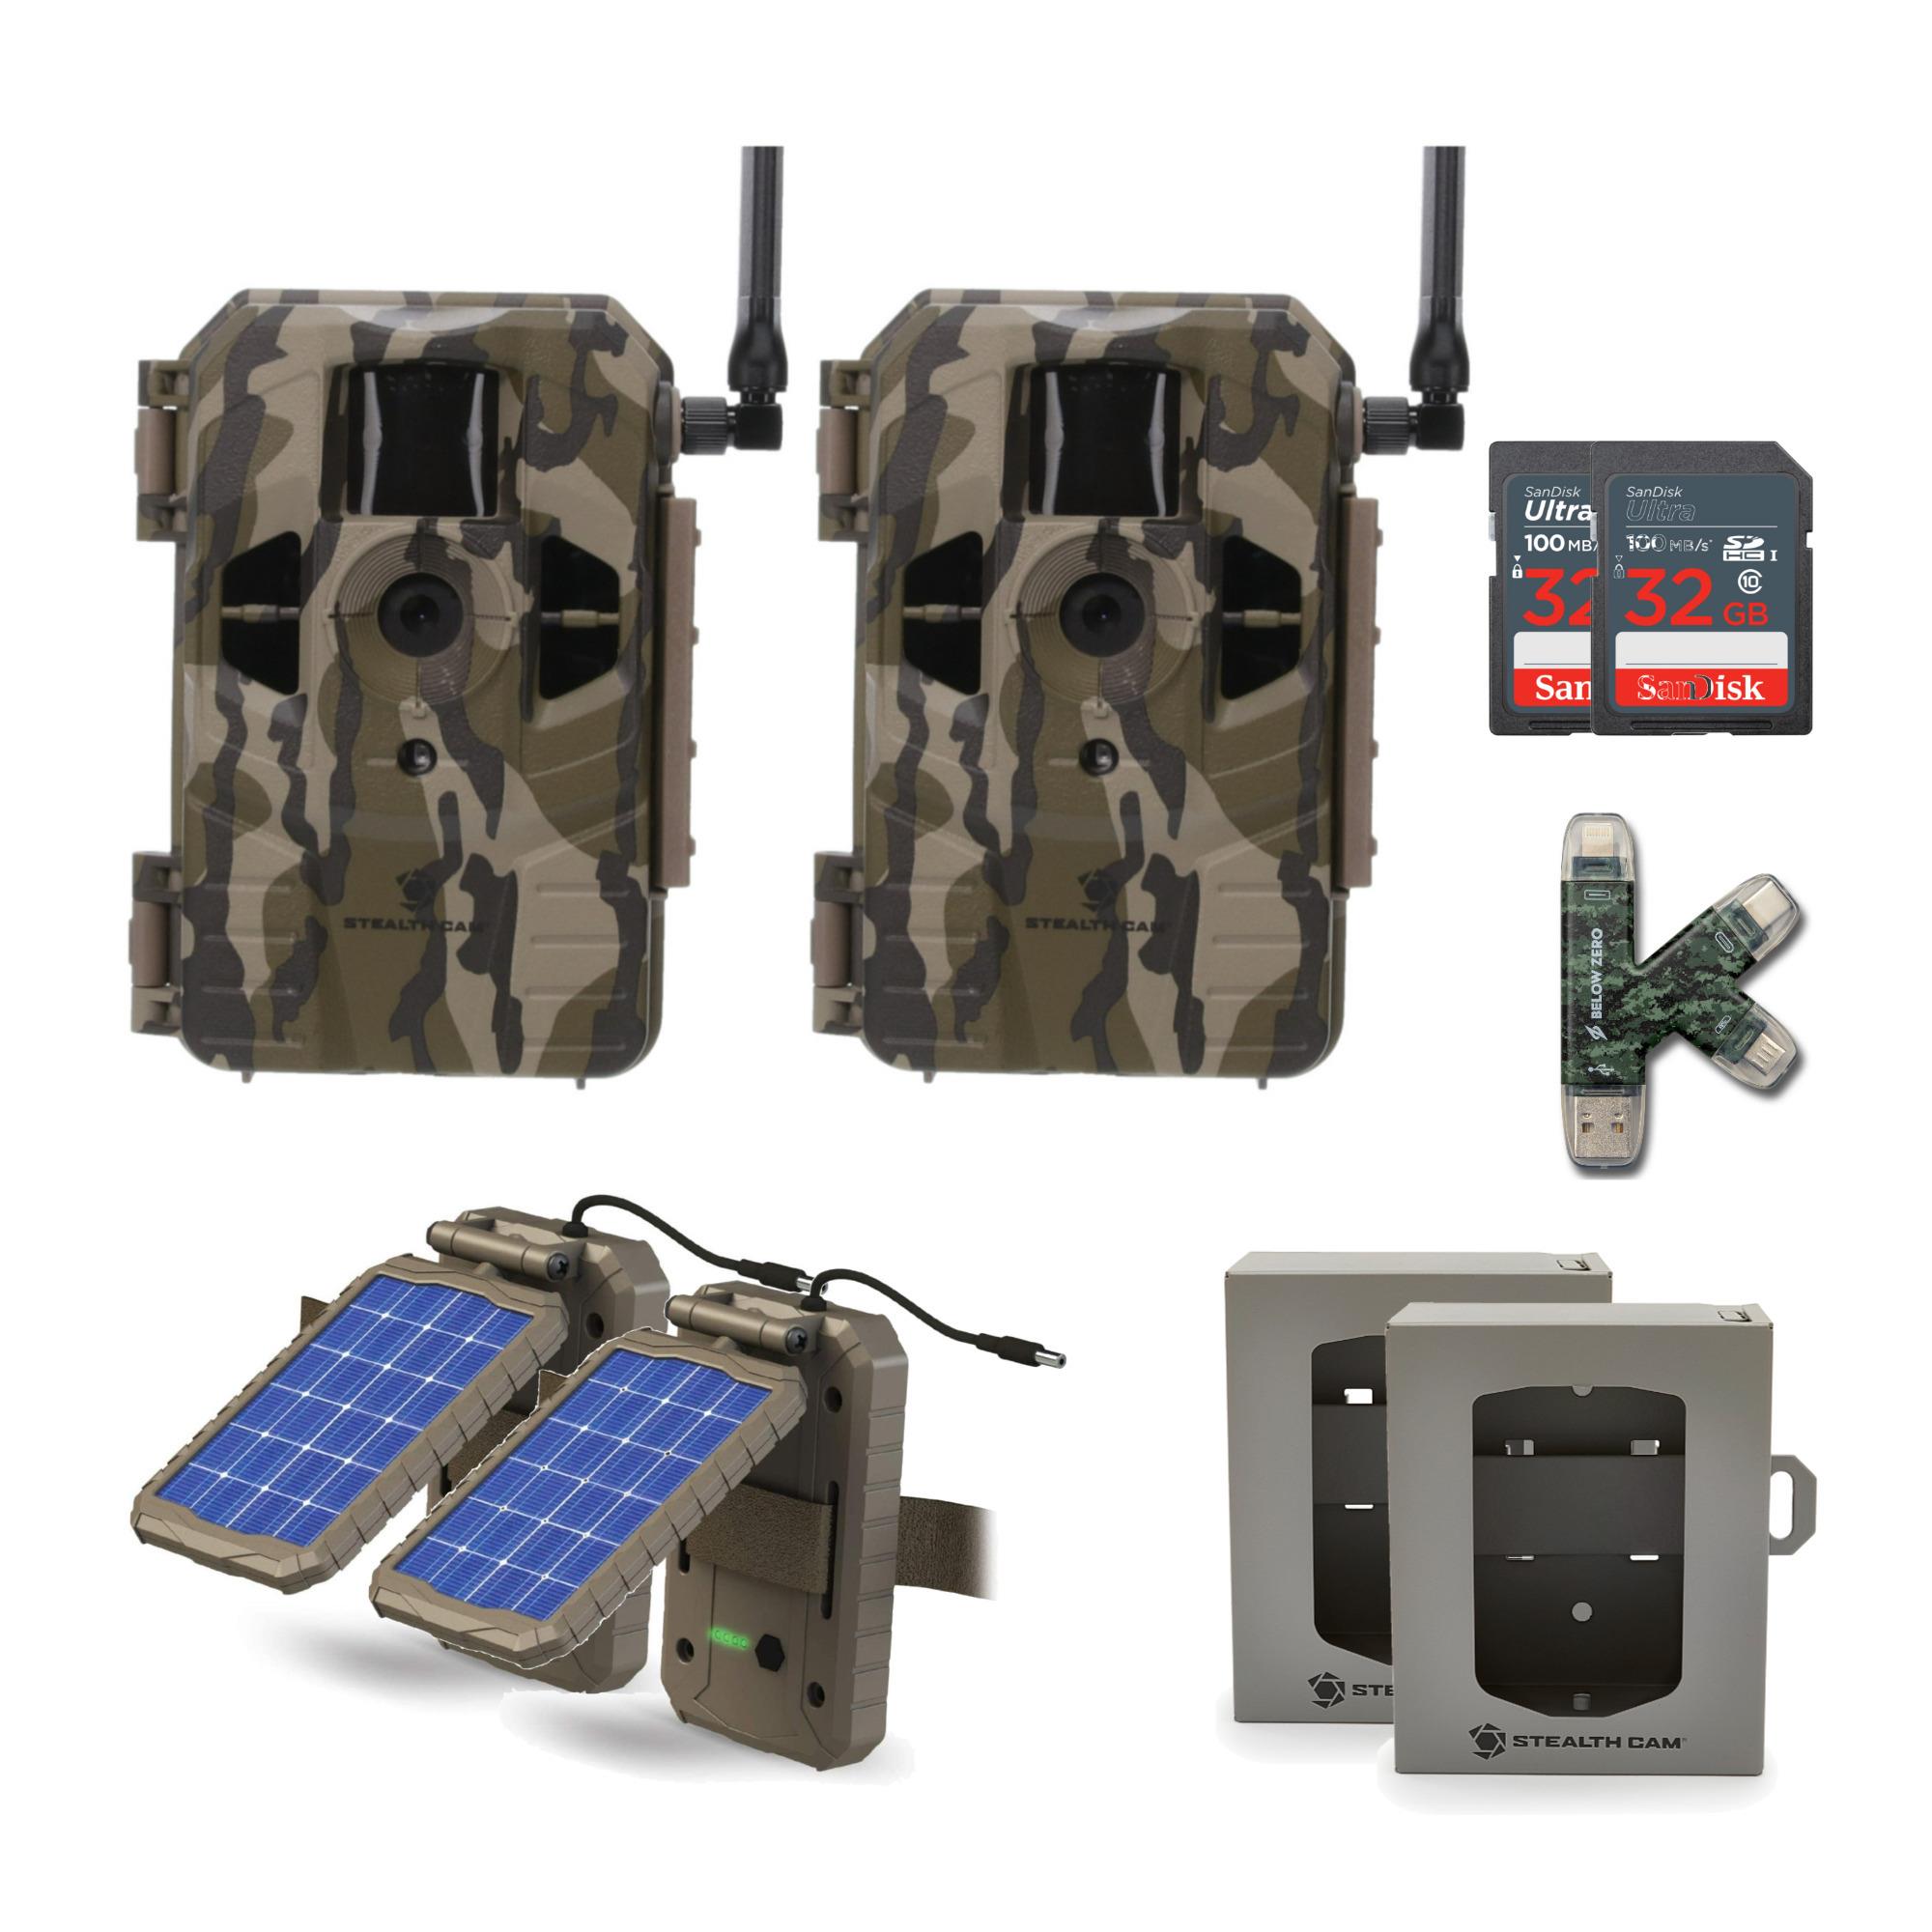 Stealth Cam Connect Cellular Trail Camera (Verizon) Security and Power Bundle (2-Pack) - image 1 of 9